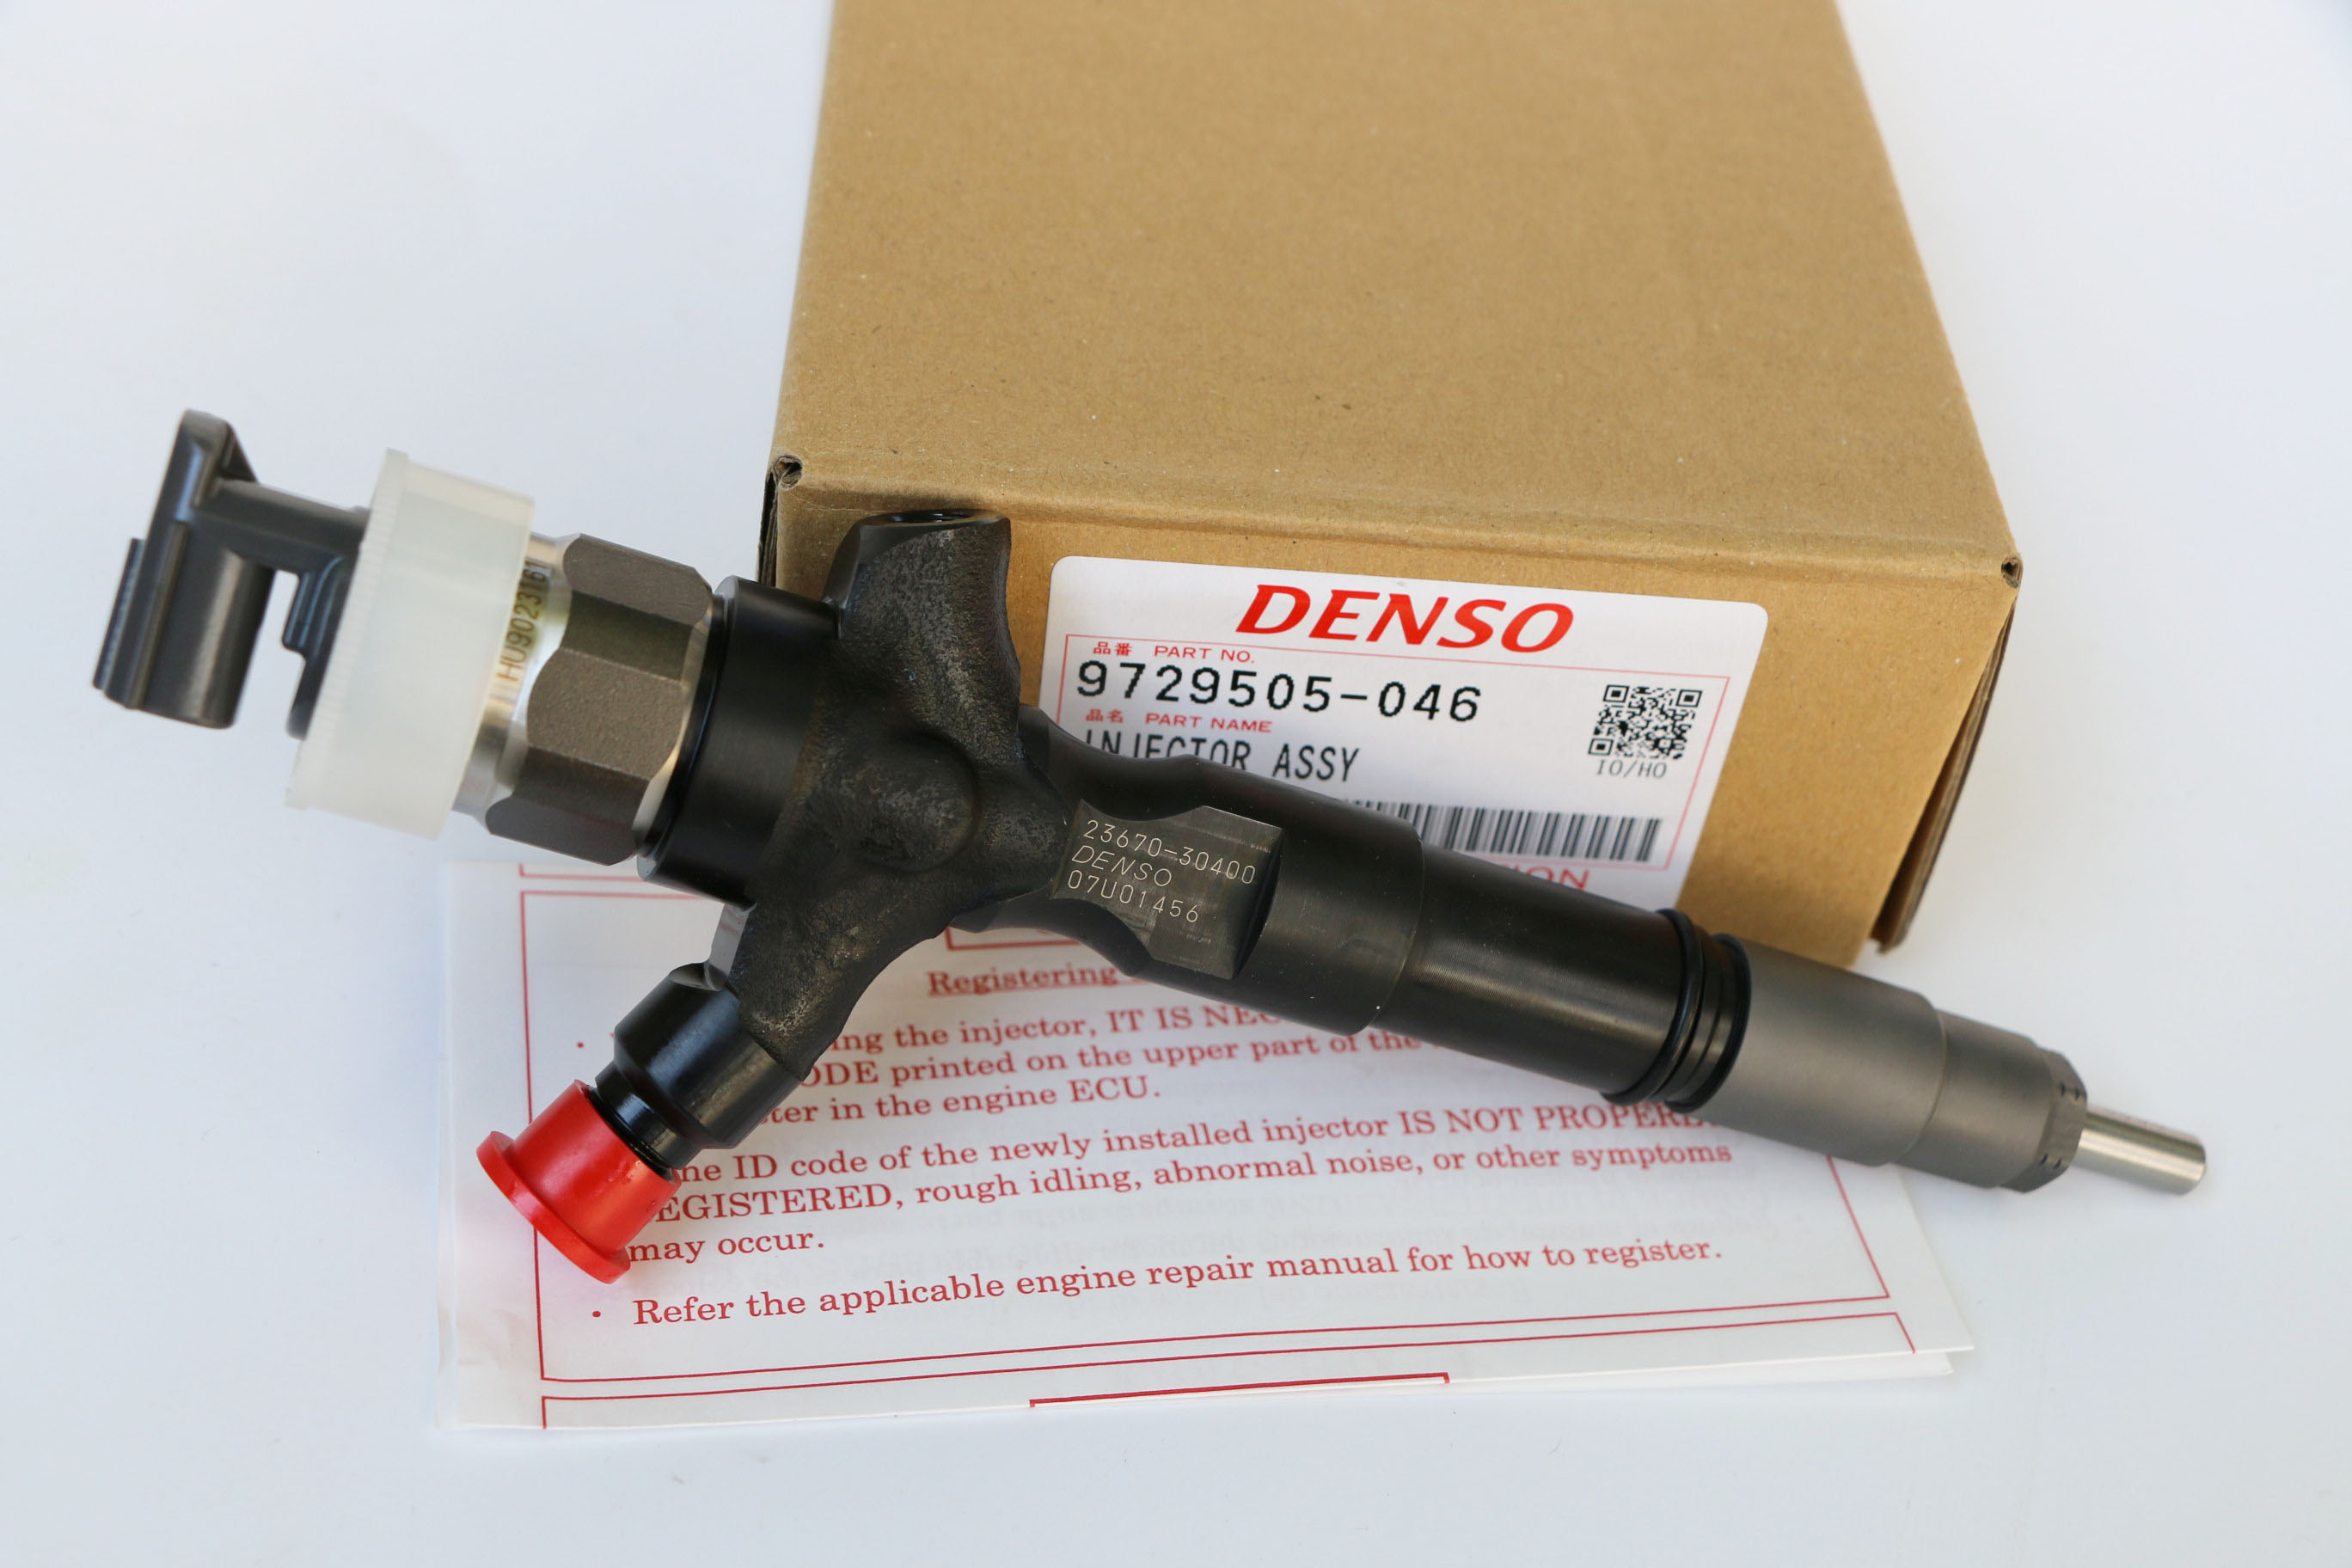 New arrived  ORIGINAL DENSO INJECTOR 295050-0460 23670-30400 Hilux made in Japan